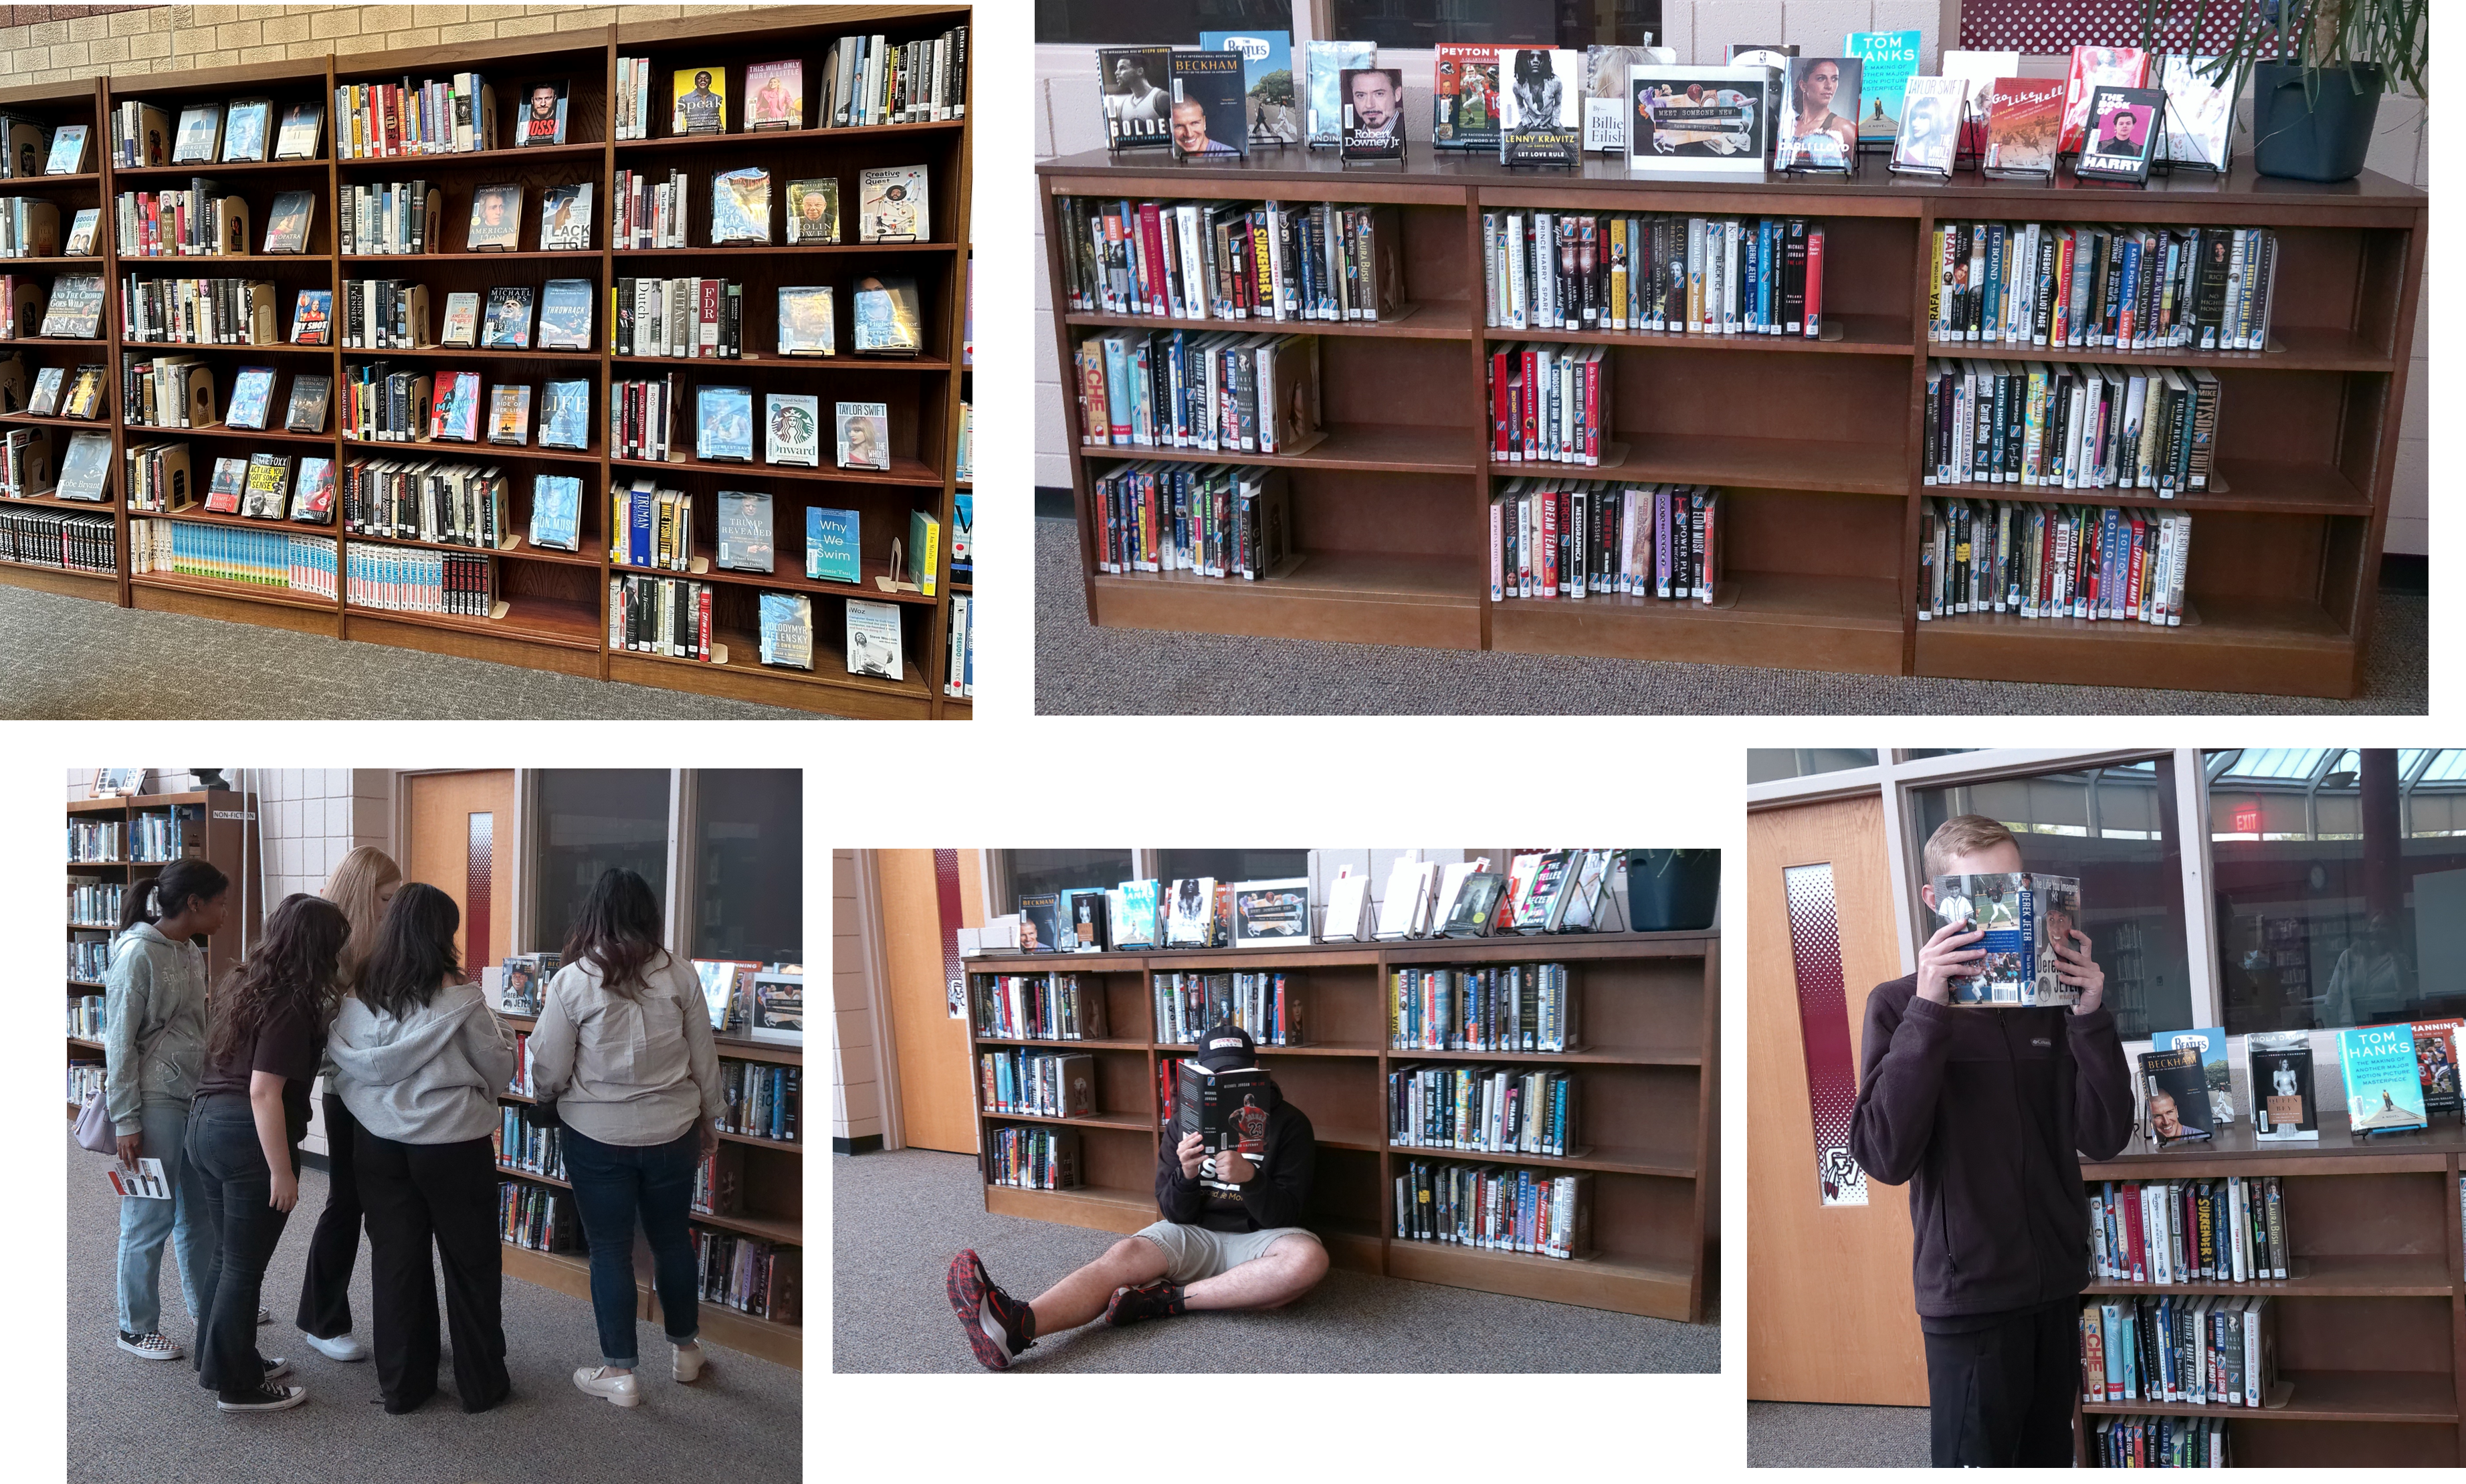 Biography book collections and students reading at high schools